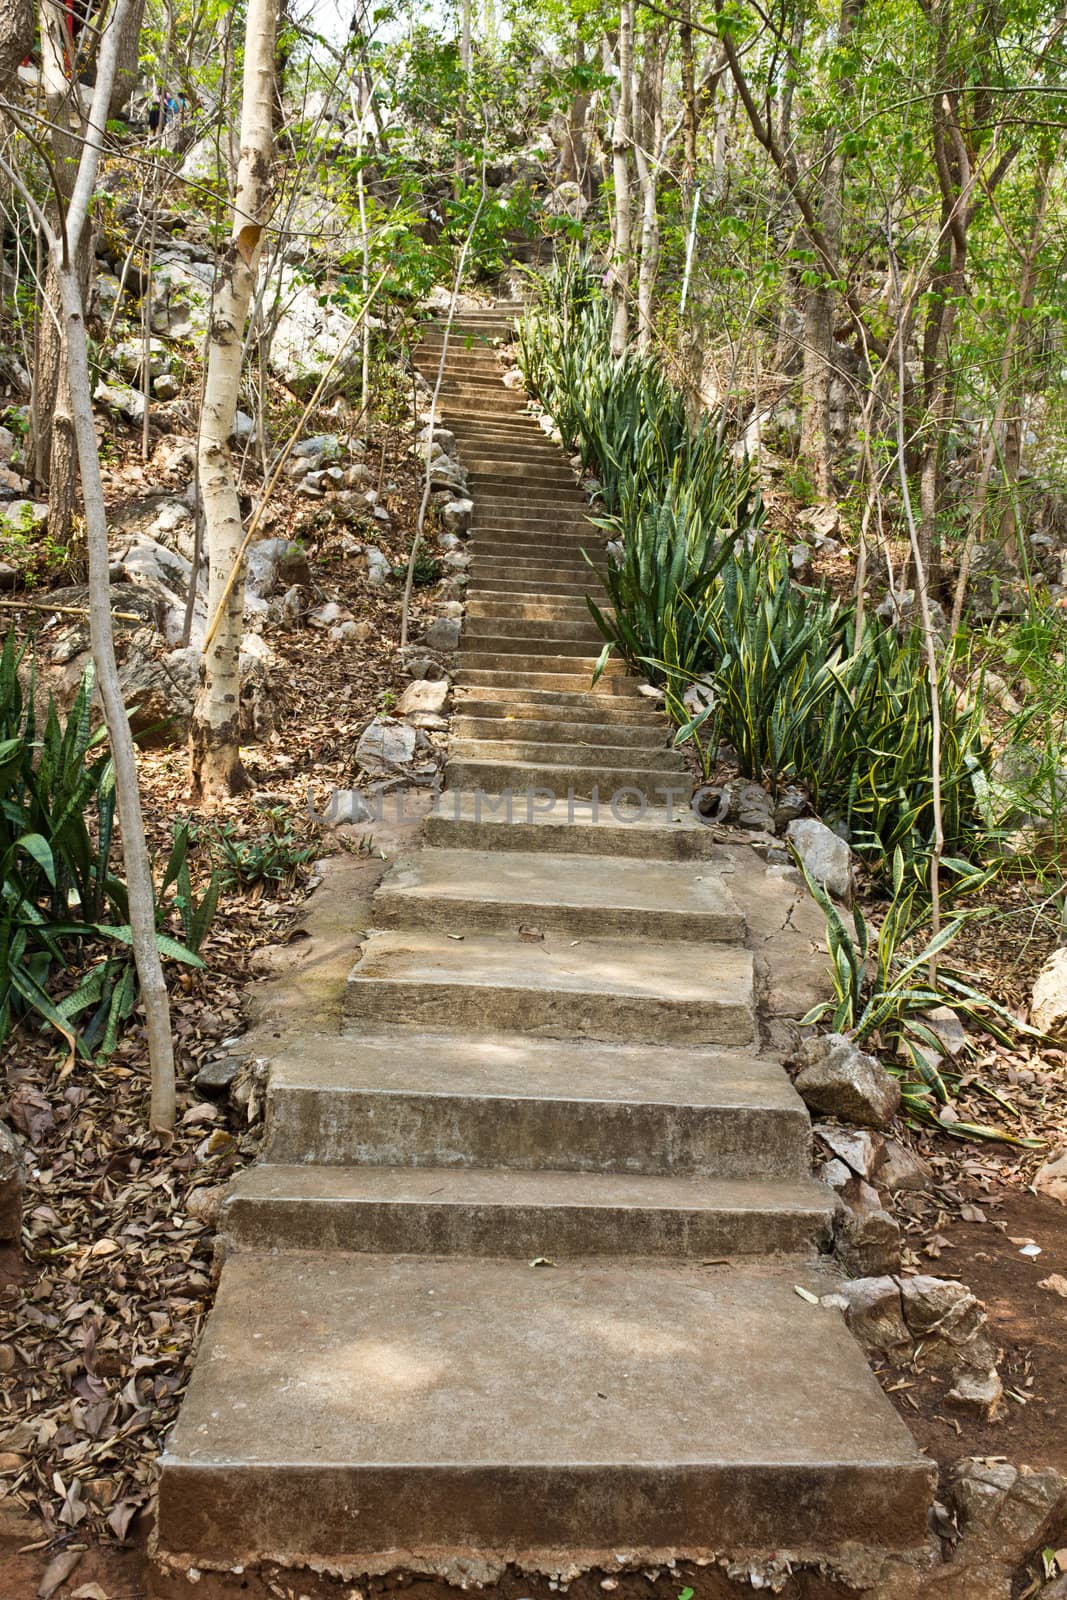 stone stairway leads up a hill in the forest